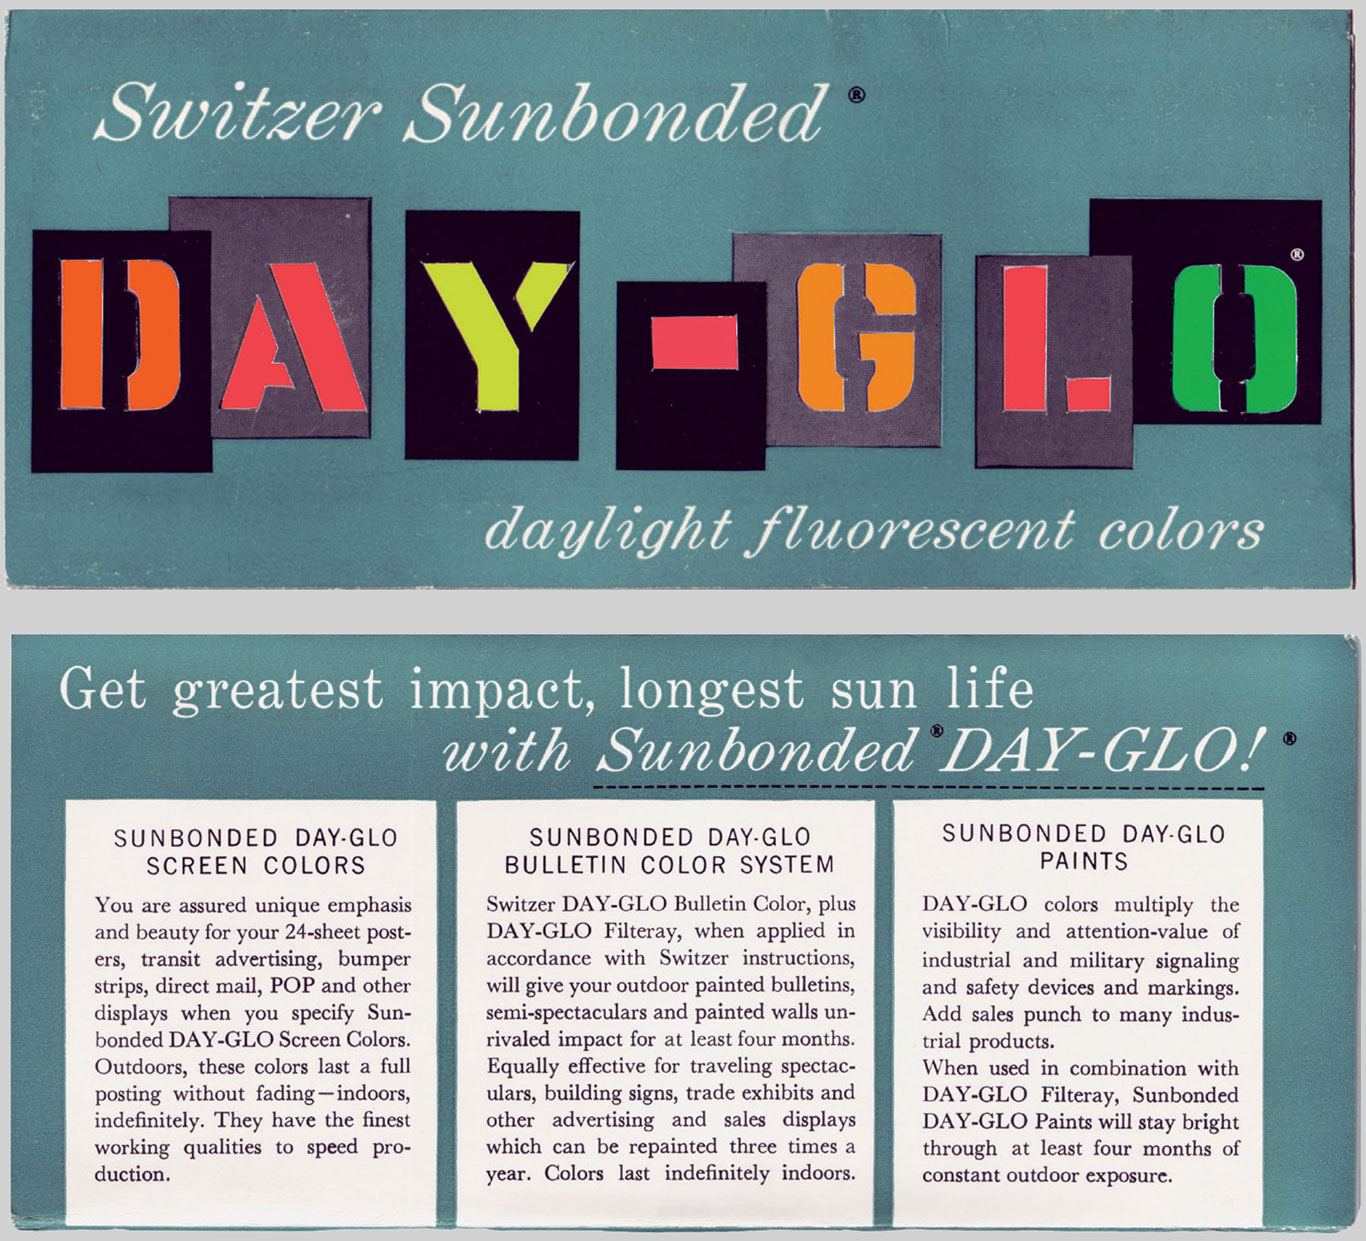 Two panels of a circa nineteen sixty brochure for Switzer Sunbonded Day-Glo, produced by the Switzer Brothers.